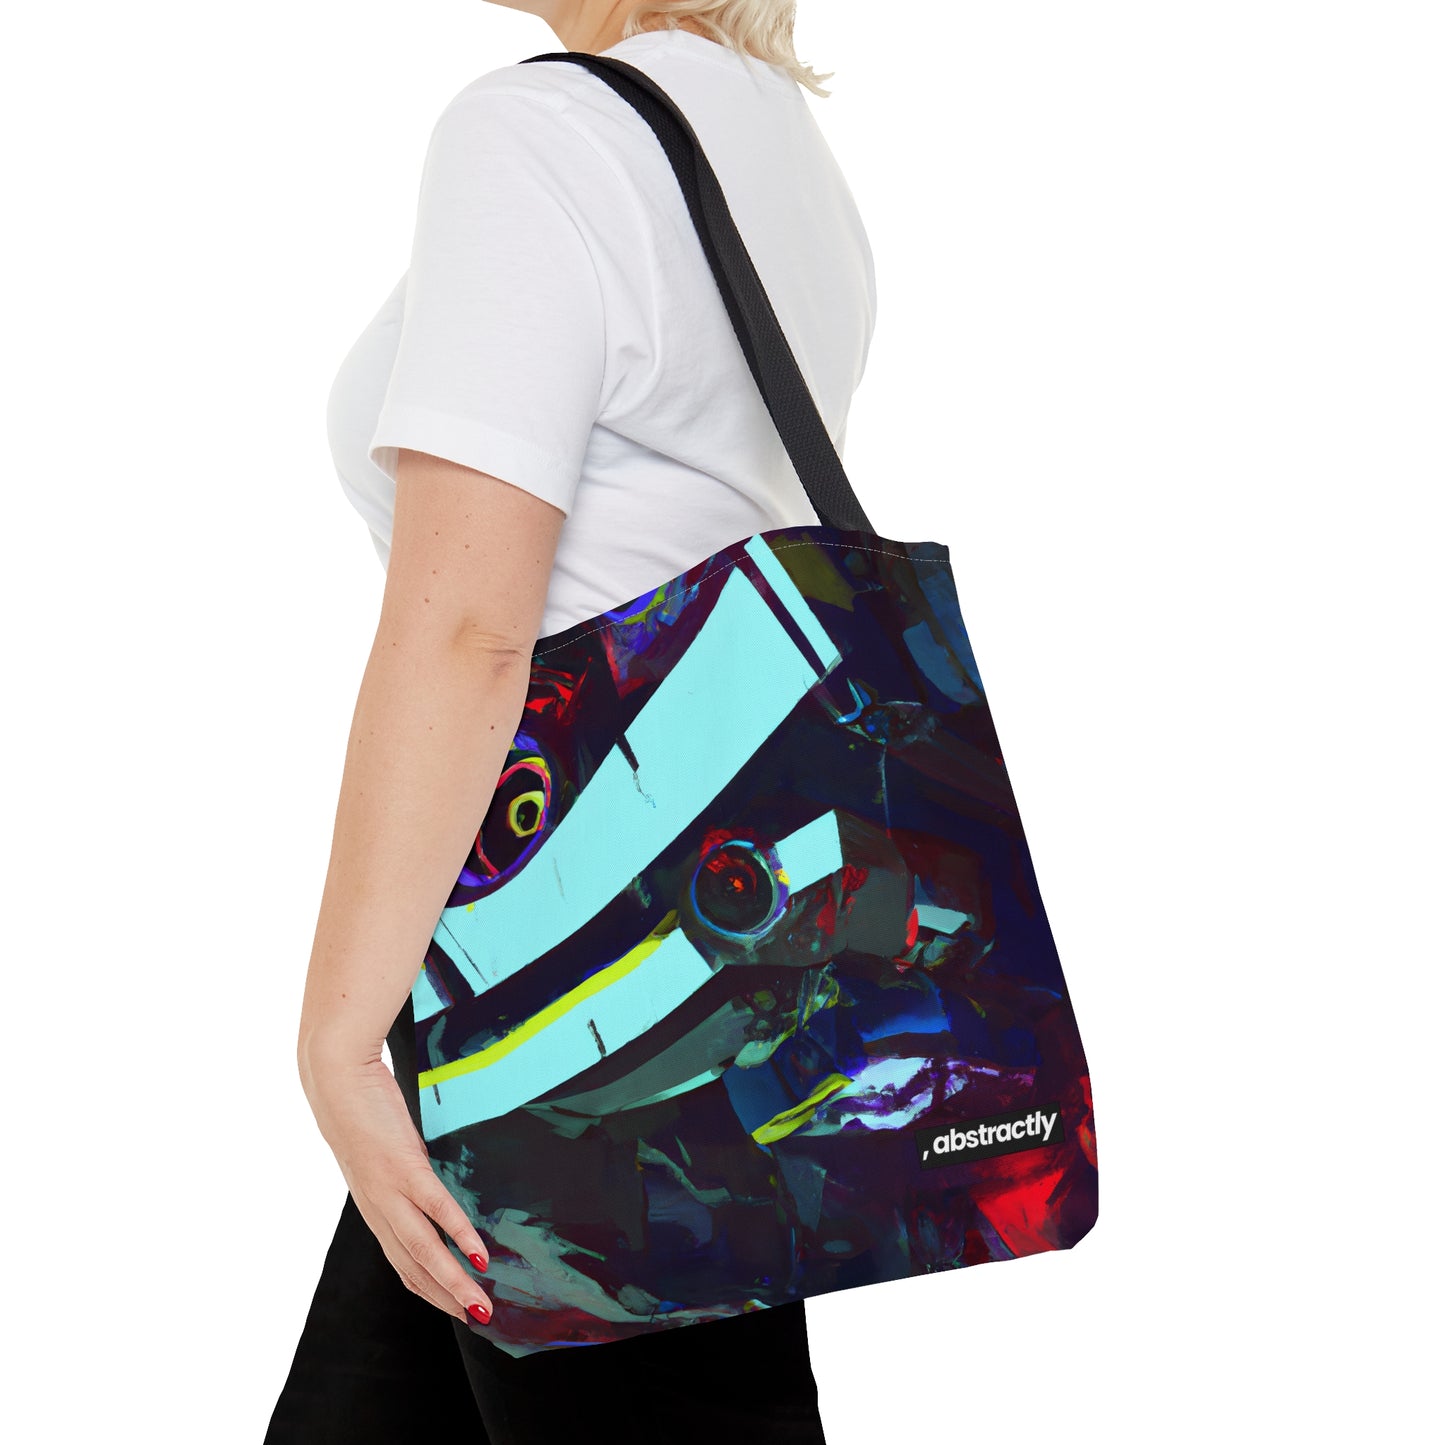 Integrity Excellence - Diversification, Abstractly - Tote